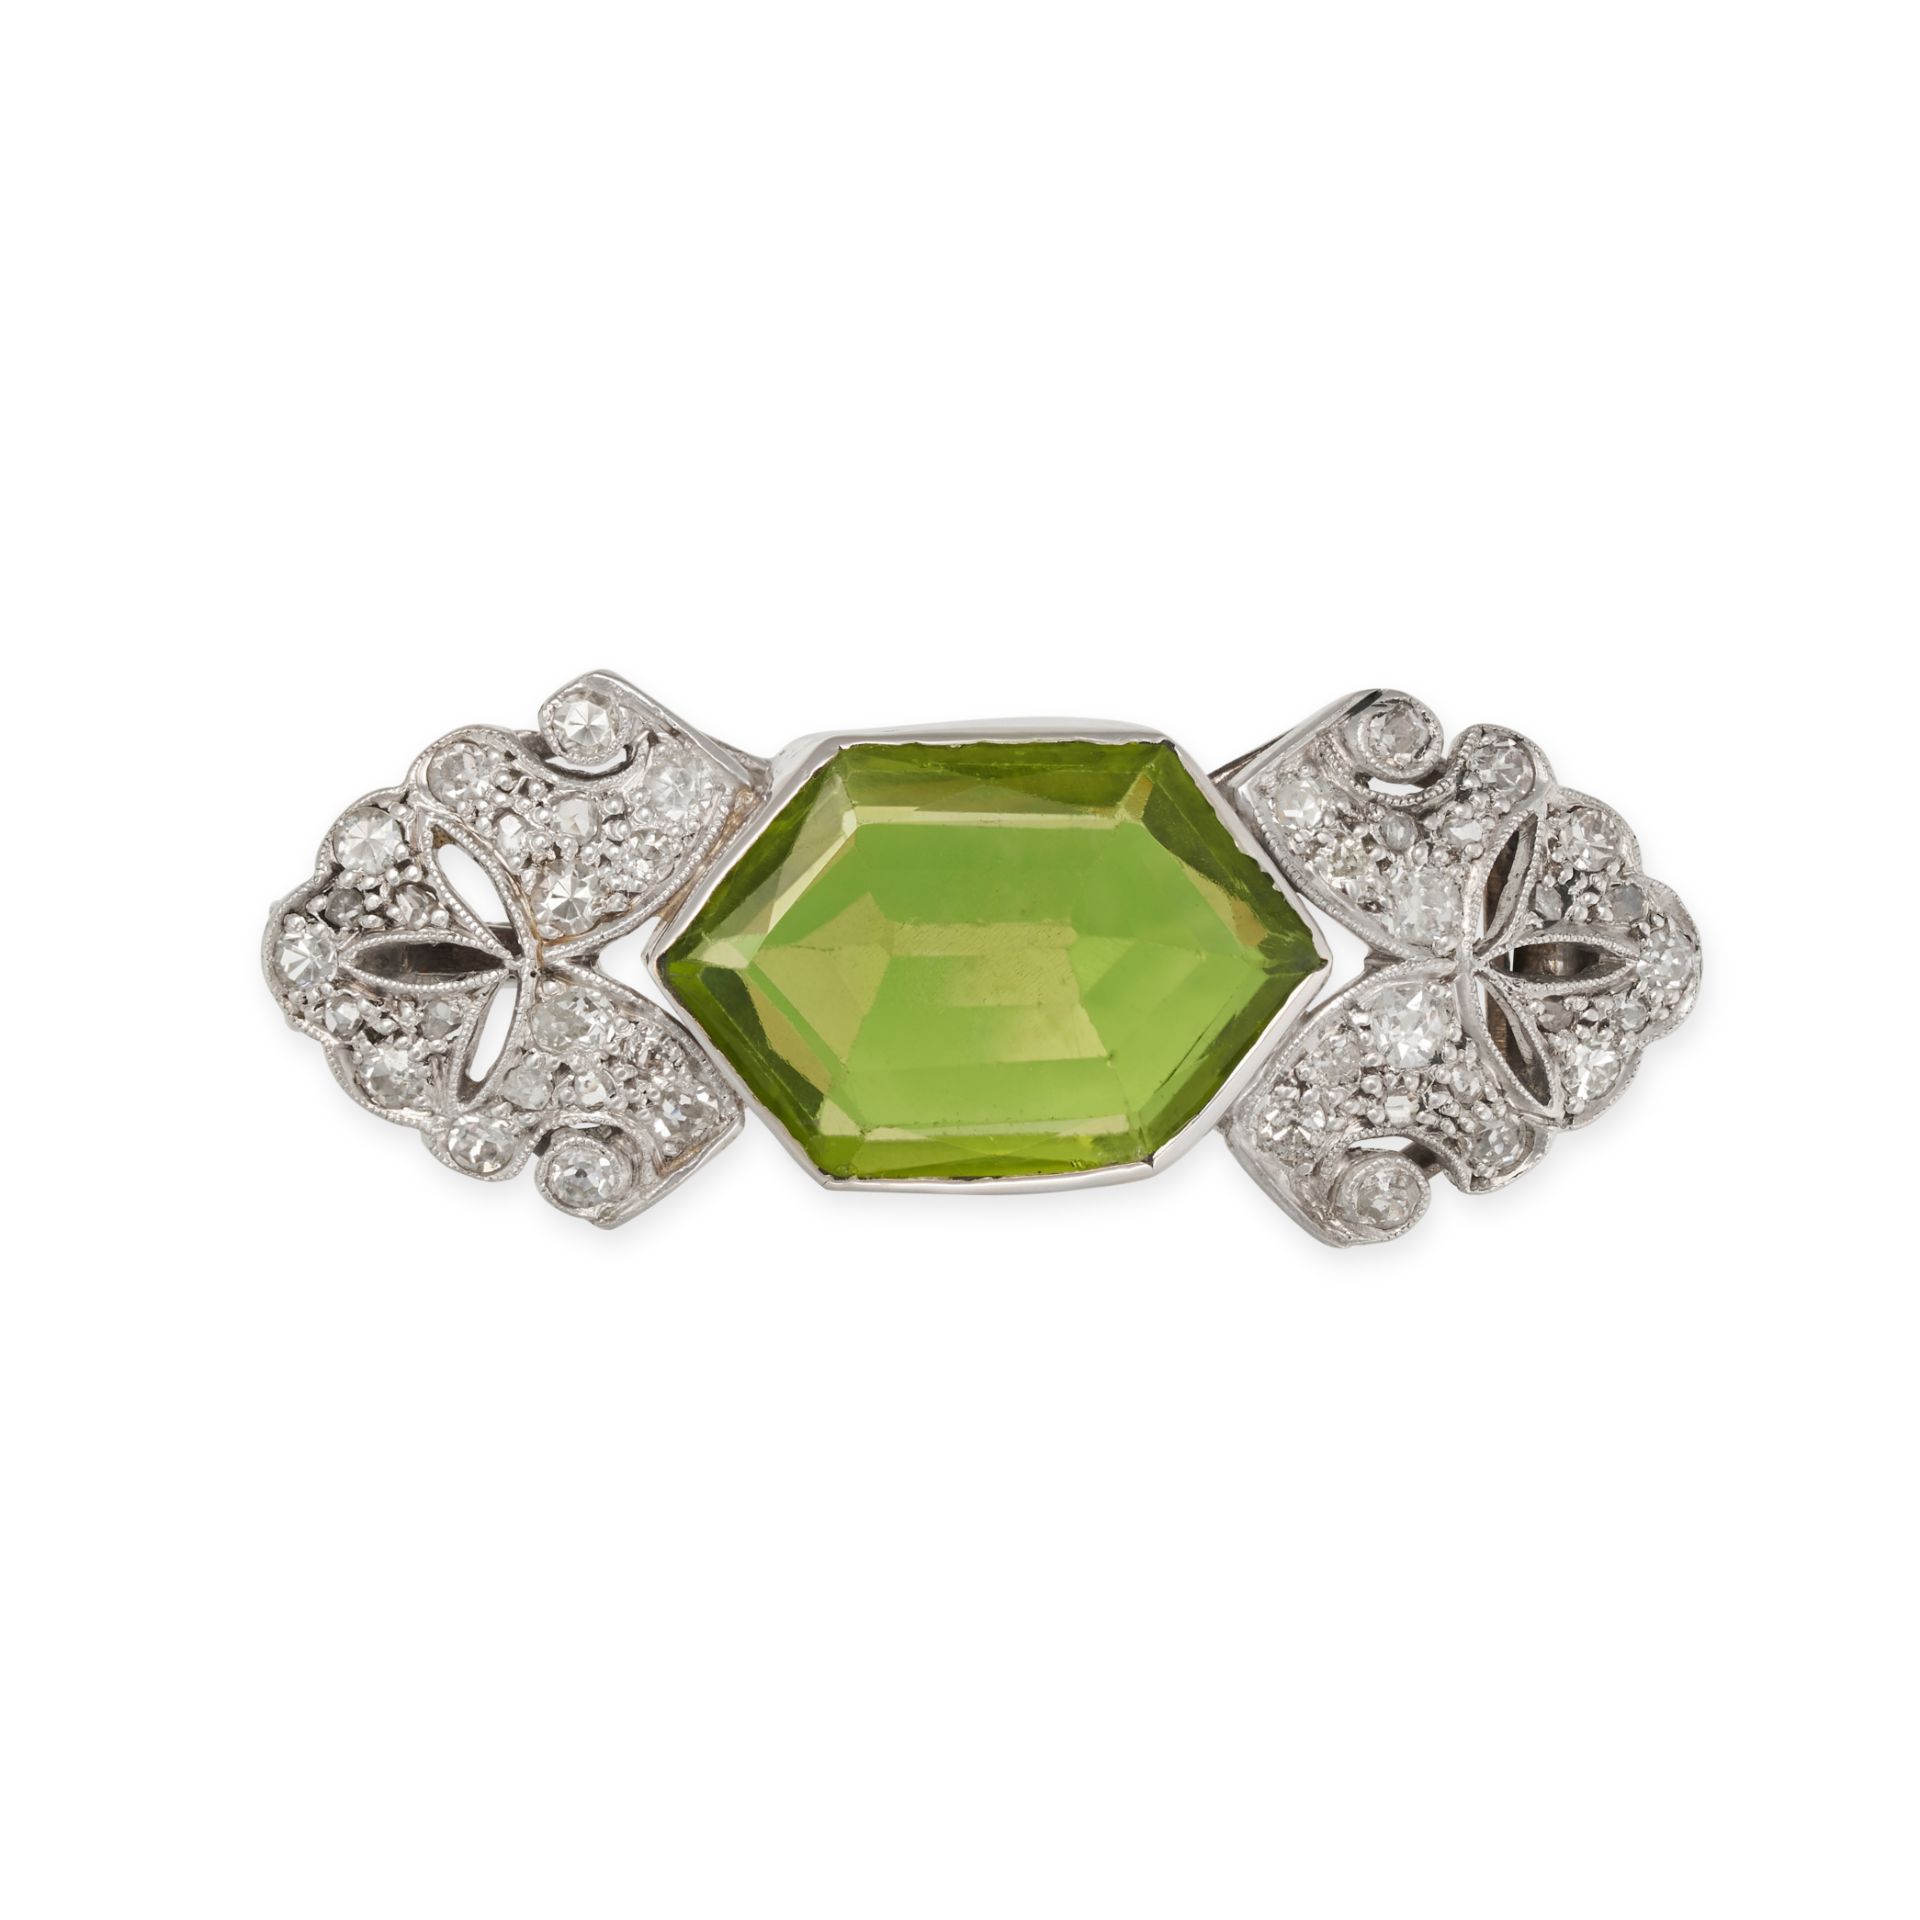 AN ANTIQUE PERIDOT AND DIAMOND BROOCH set with a fancy cut peridot of approximately 4.30 carats a...